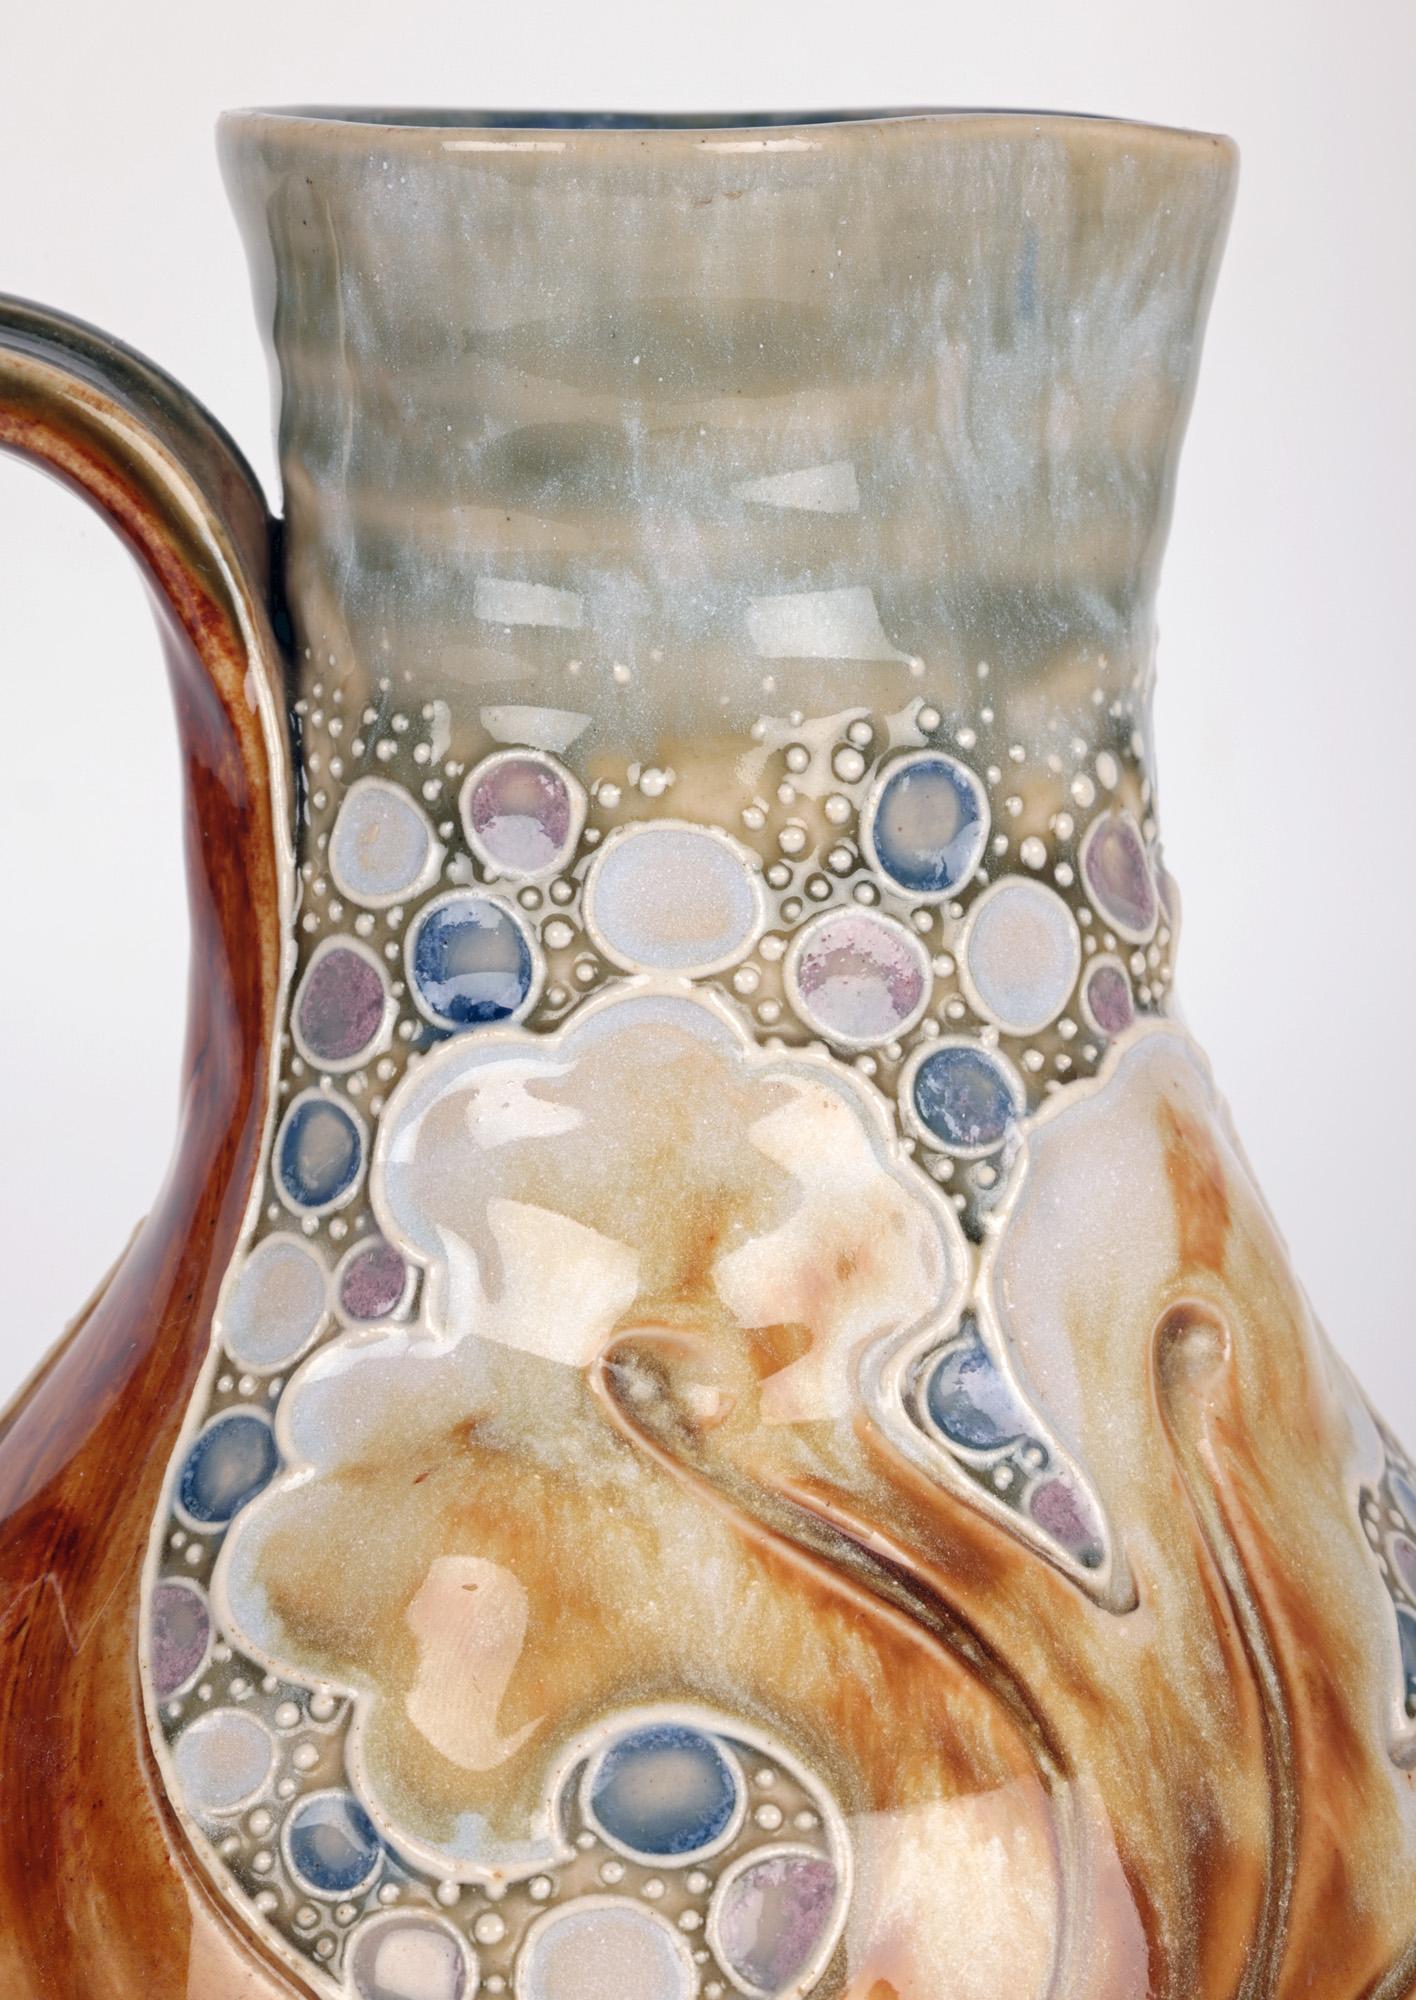 A very stylish and unusual Doulton Lambeth Art Pottery jug with mask handle and scrolling leaf designs by renowned modeler, designer and decorator Mark V Marshall and dating from around 1890. The stoneware jug is of rounded bulbous shape standing on